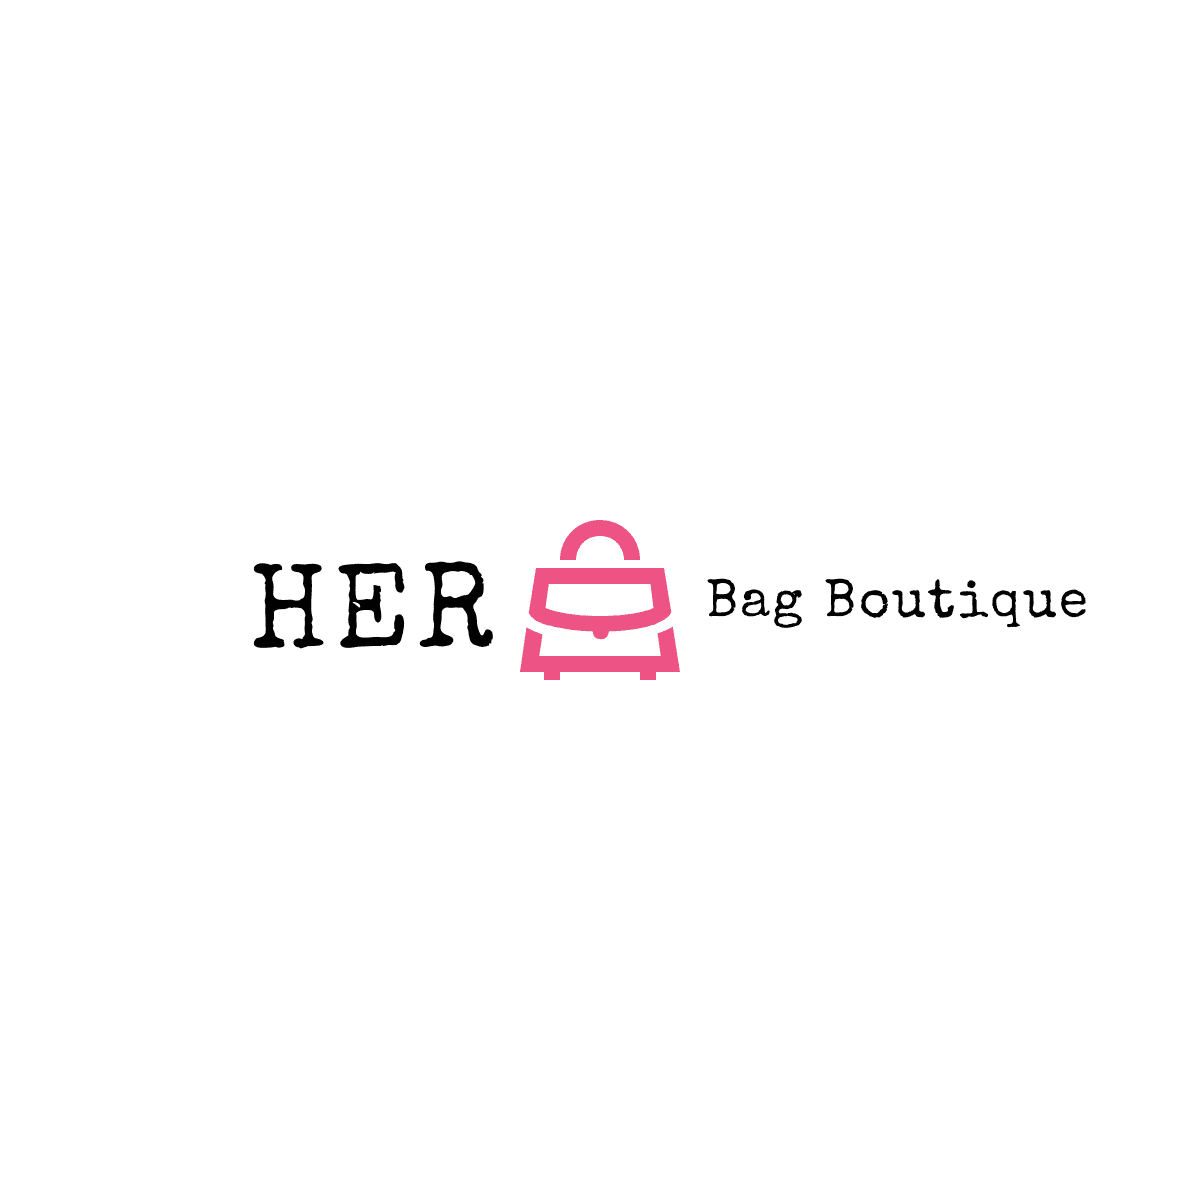 The logo or business face of "HER BAG BOUTIQUE"